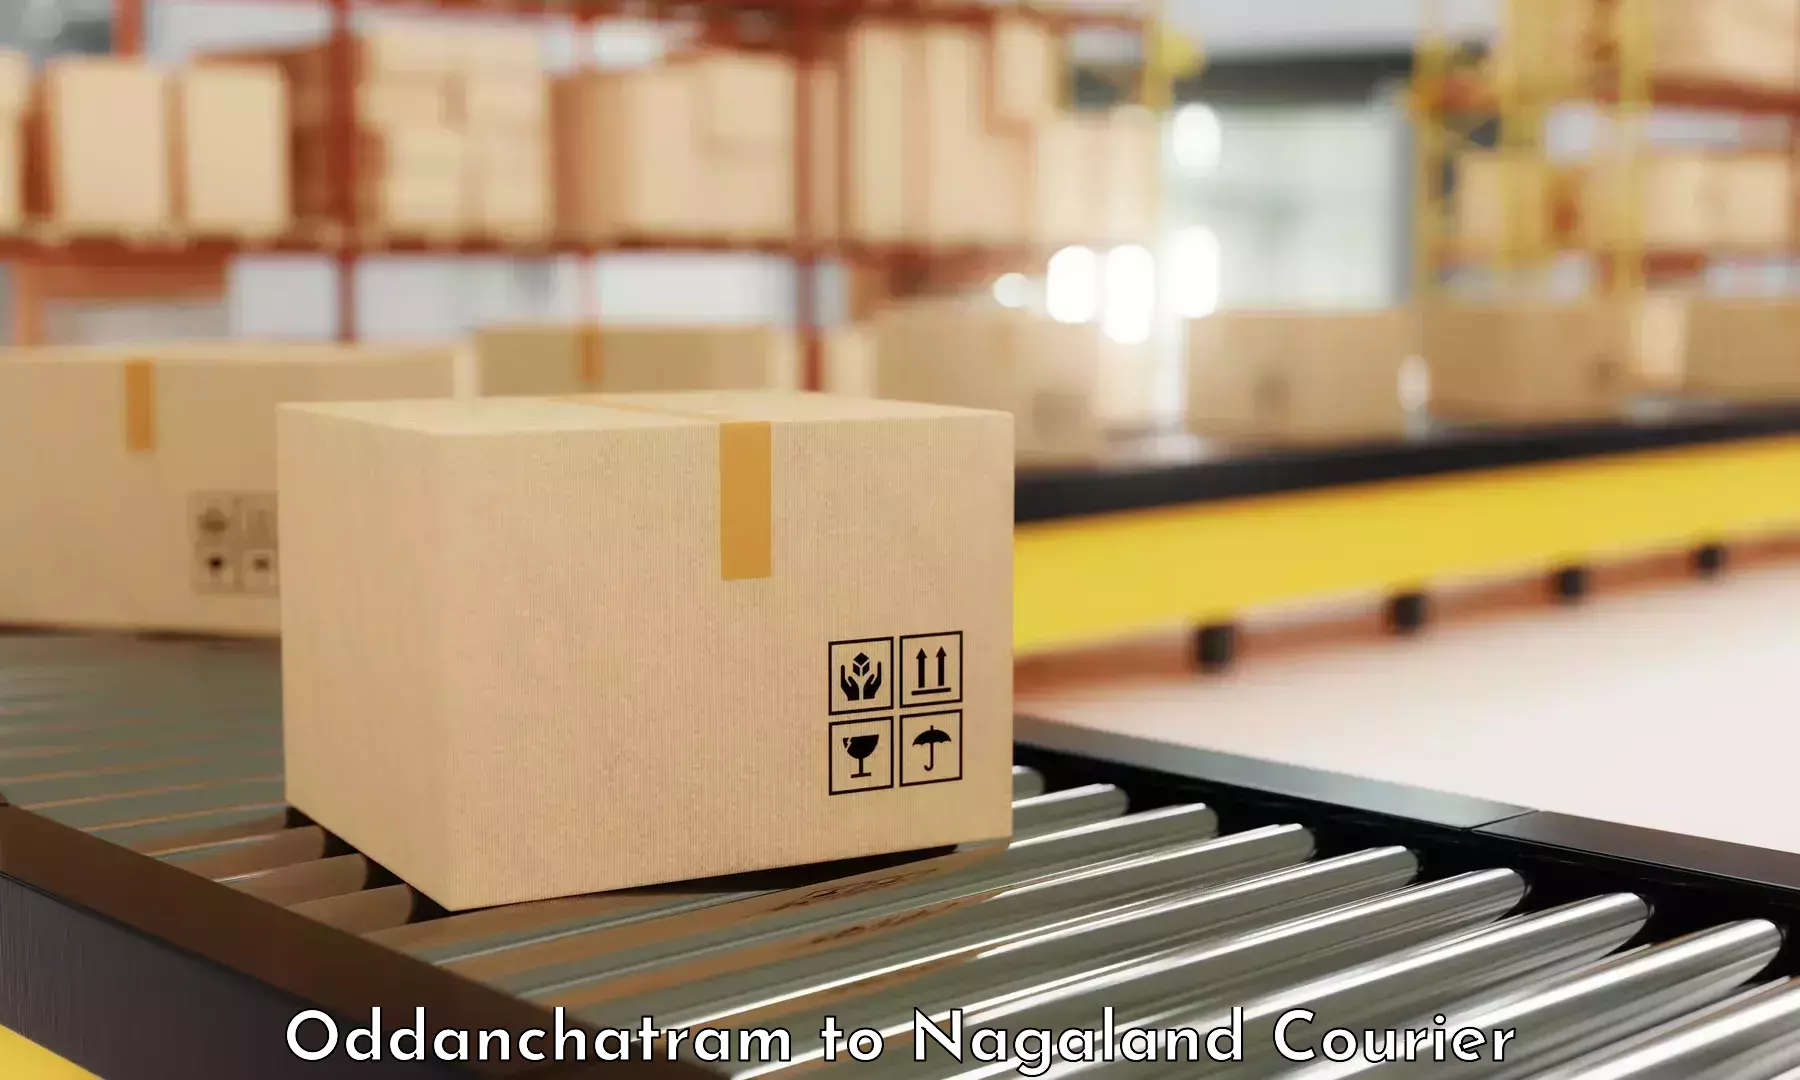 Online courier booking Oddanchatram to Dimapur